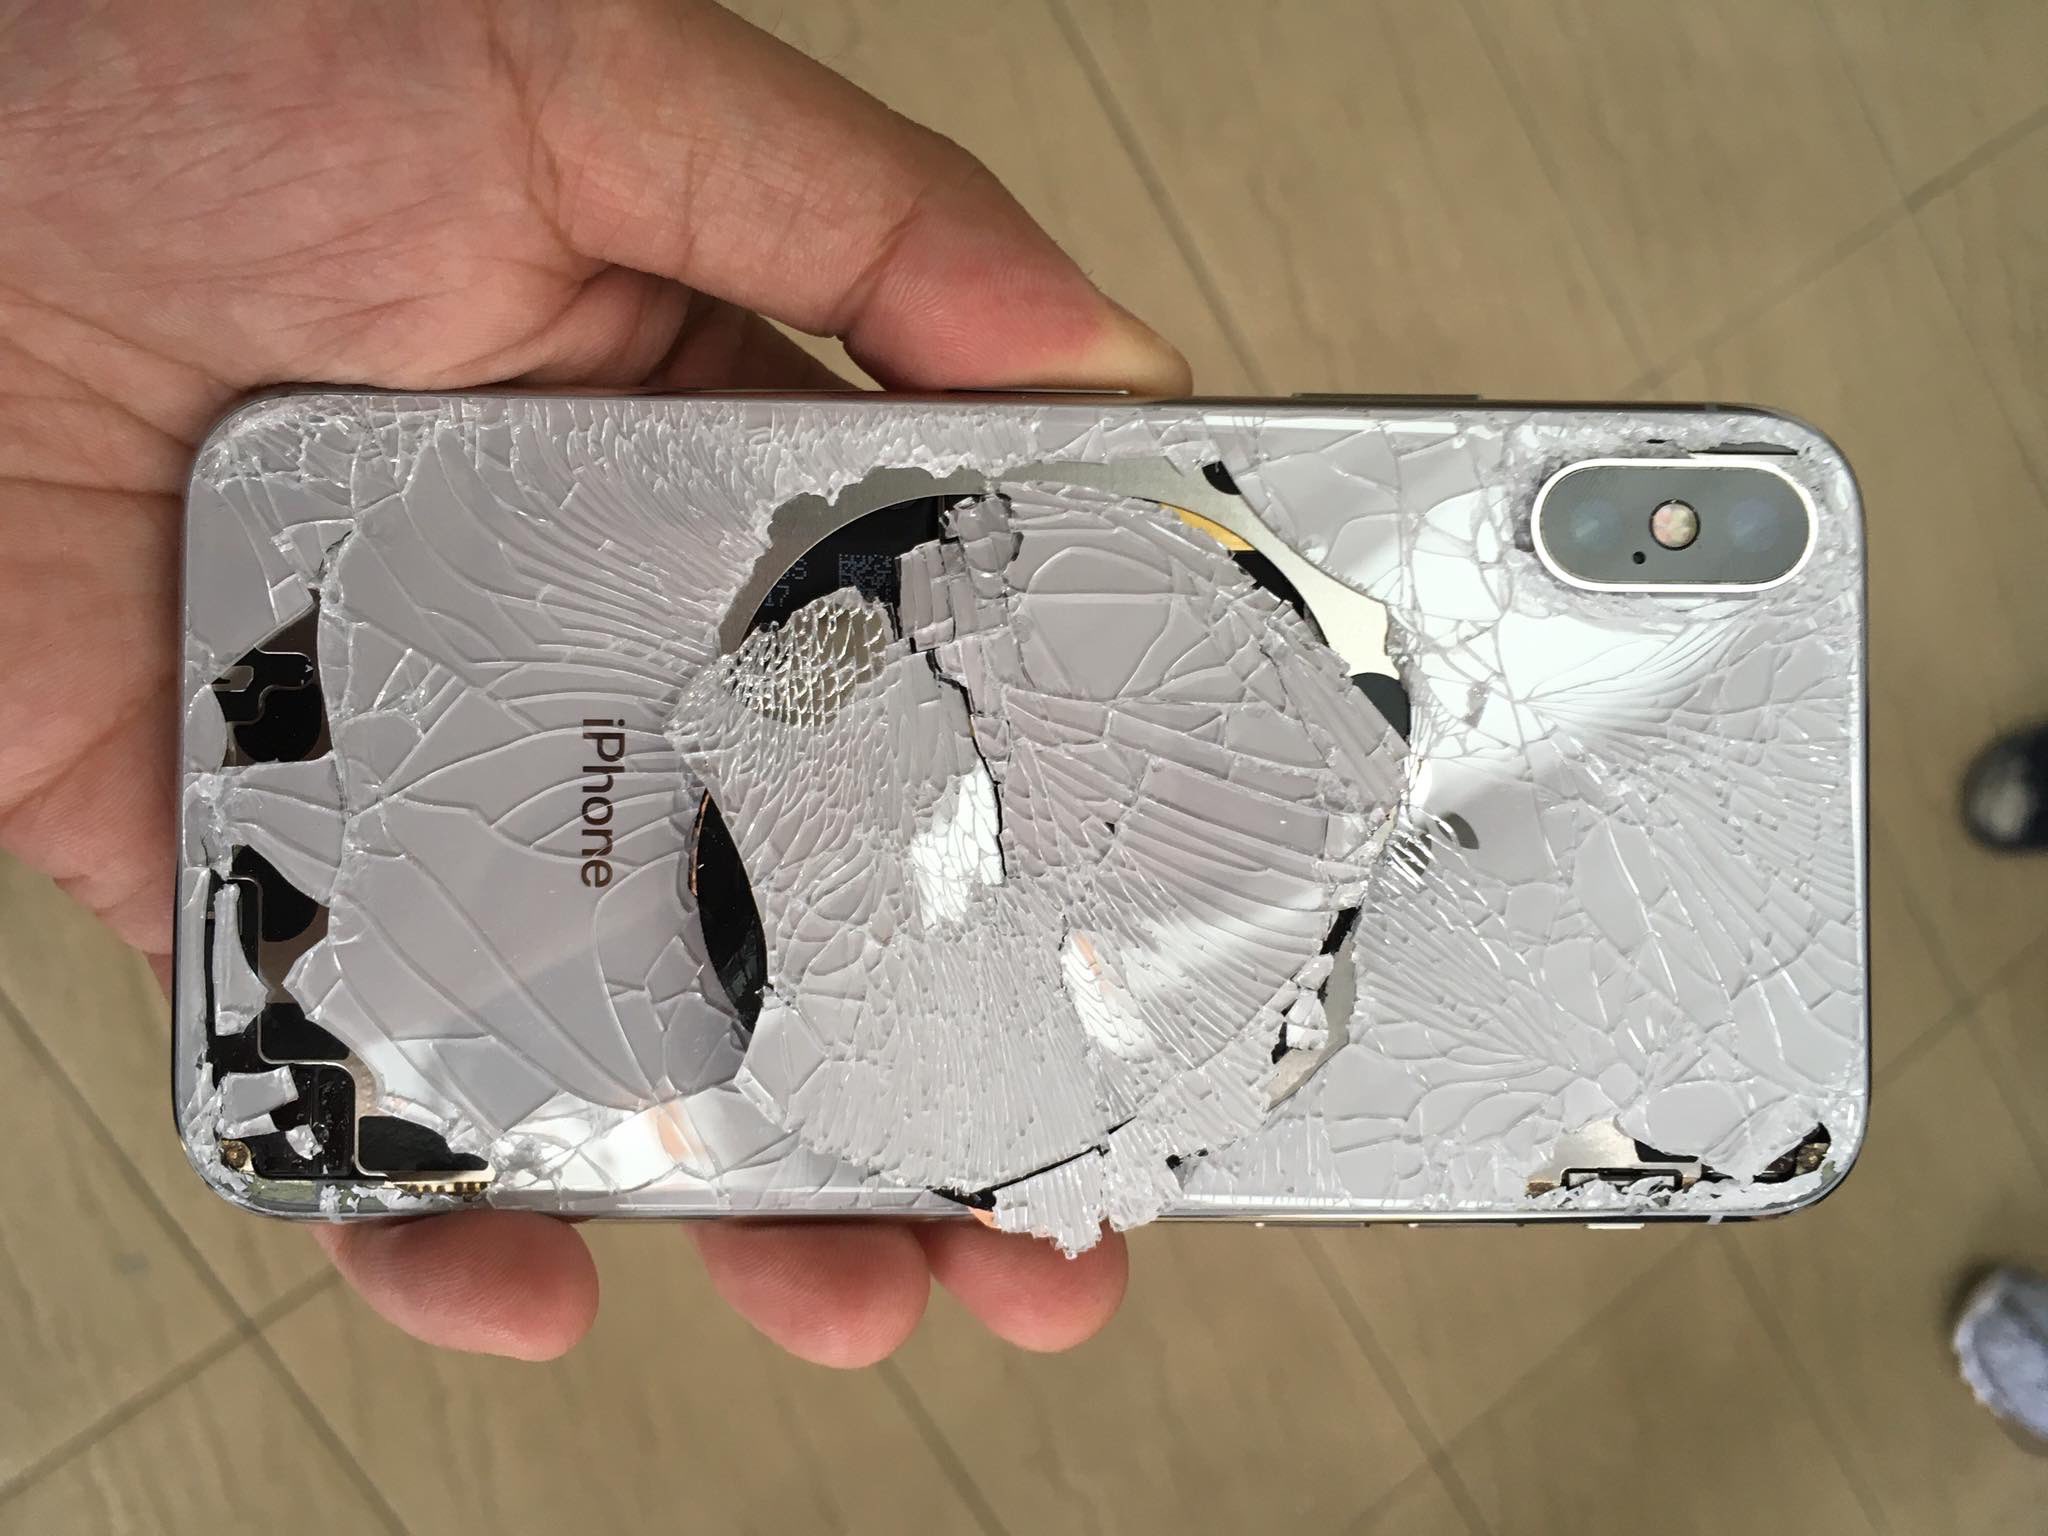 iphone-x-rear-glass-shattered-003_7f92.jpg